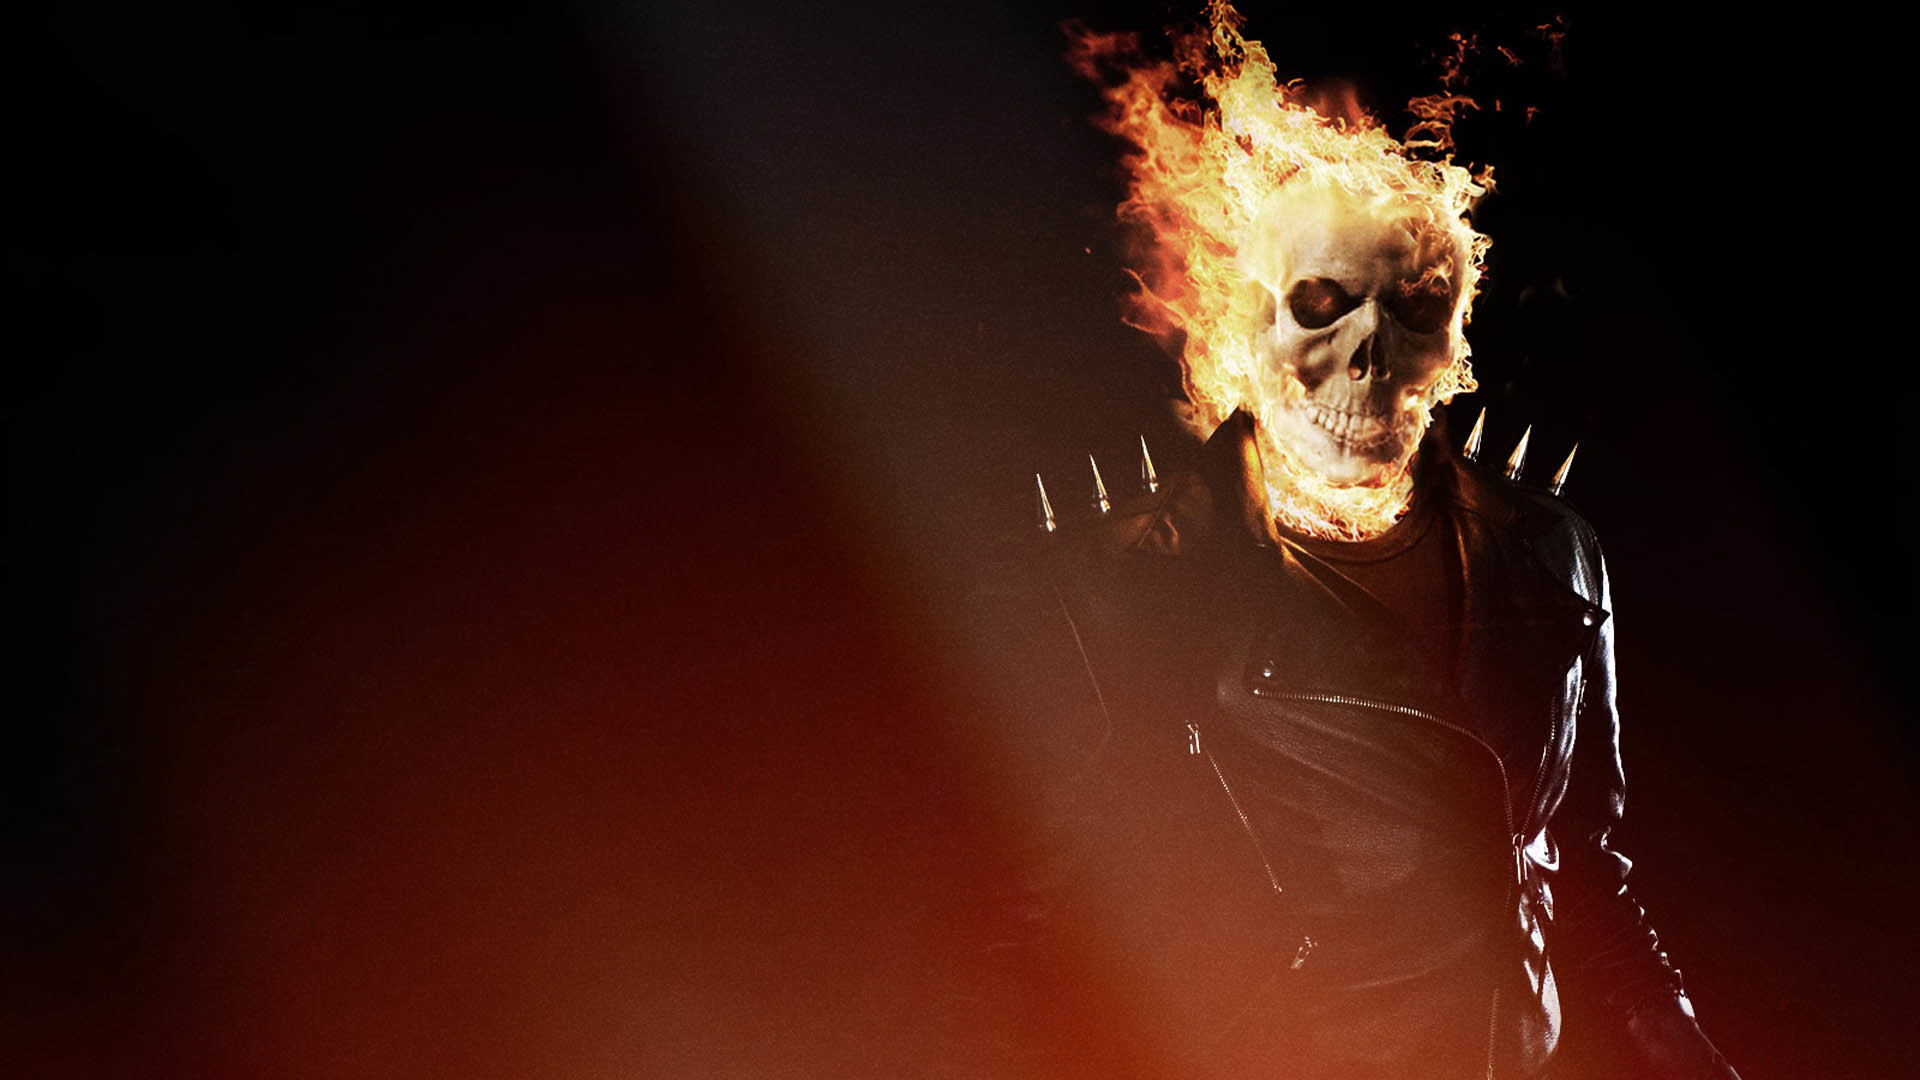 1920x1080 The Ghost Rider images Ghost rider HD wallpaper and background photos